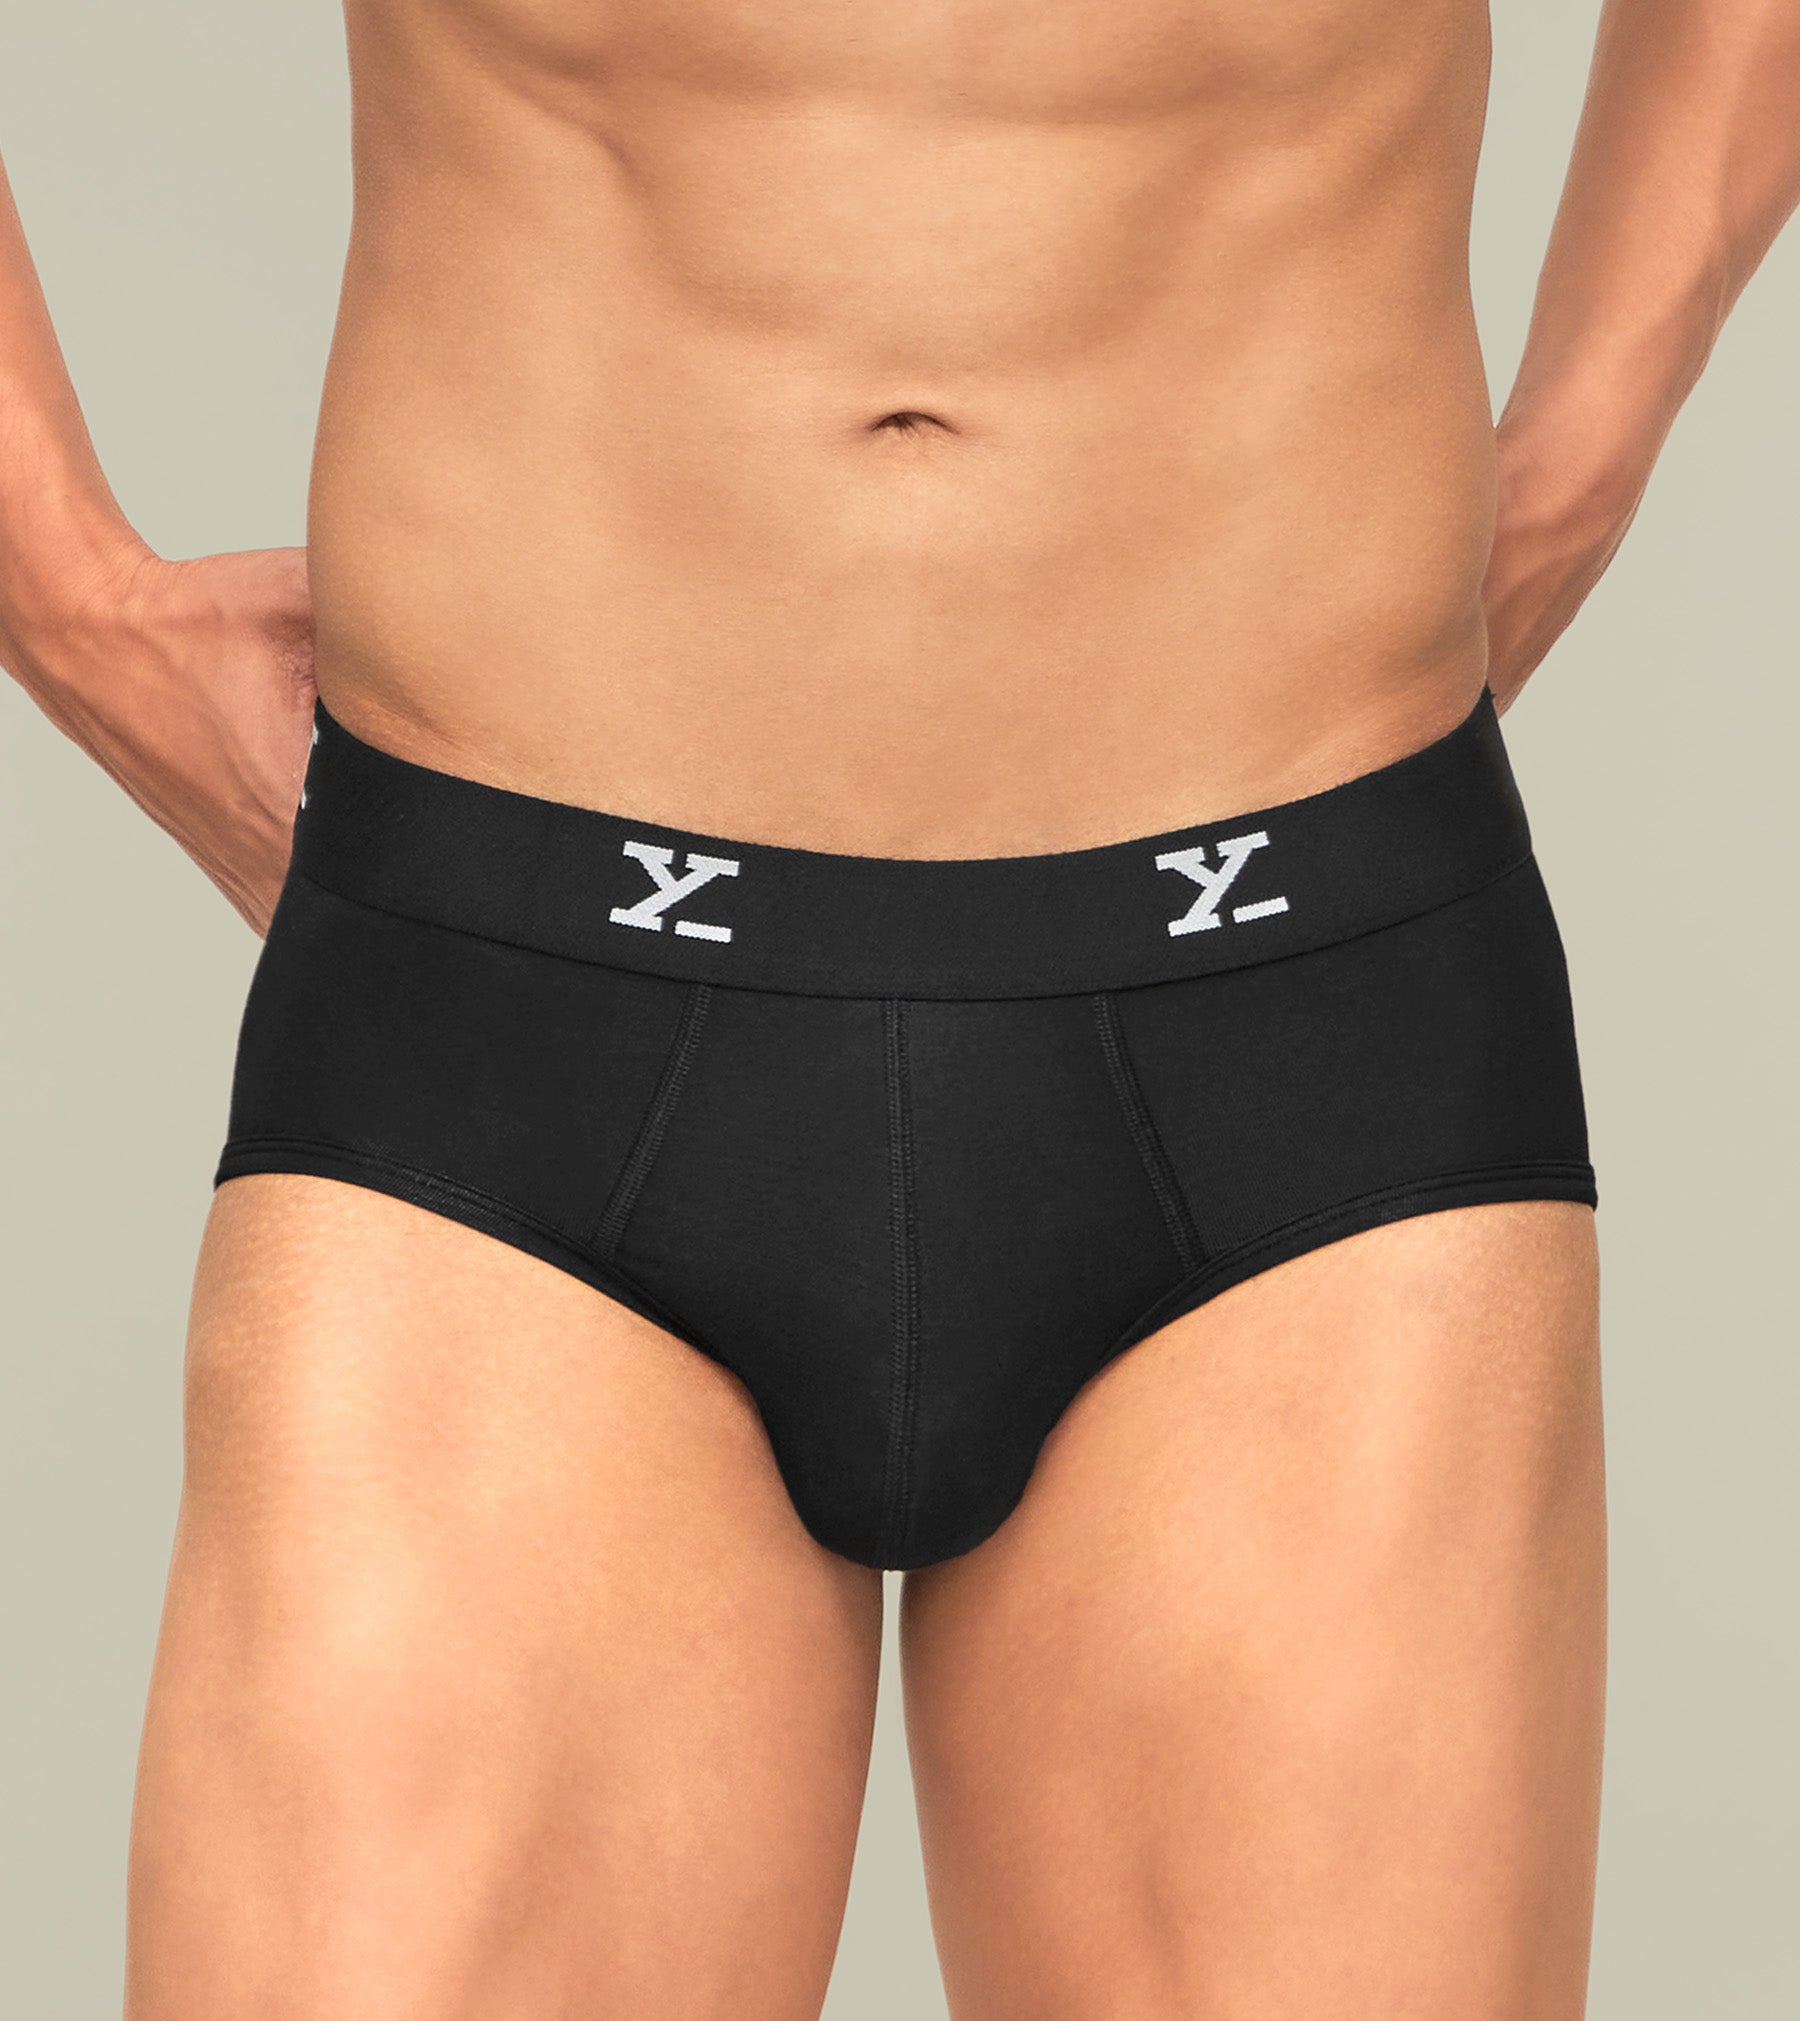 Ace Modal Briefs For Men Pack of 2 (Red, Black) -  XYXX Mens Apparels